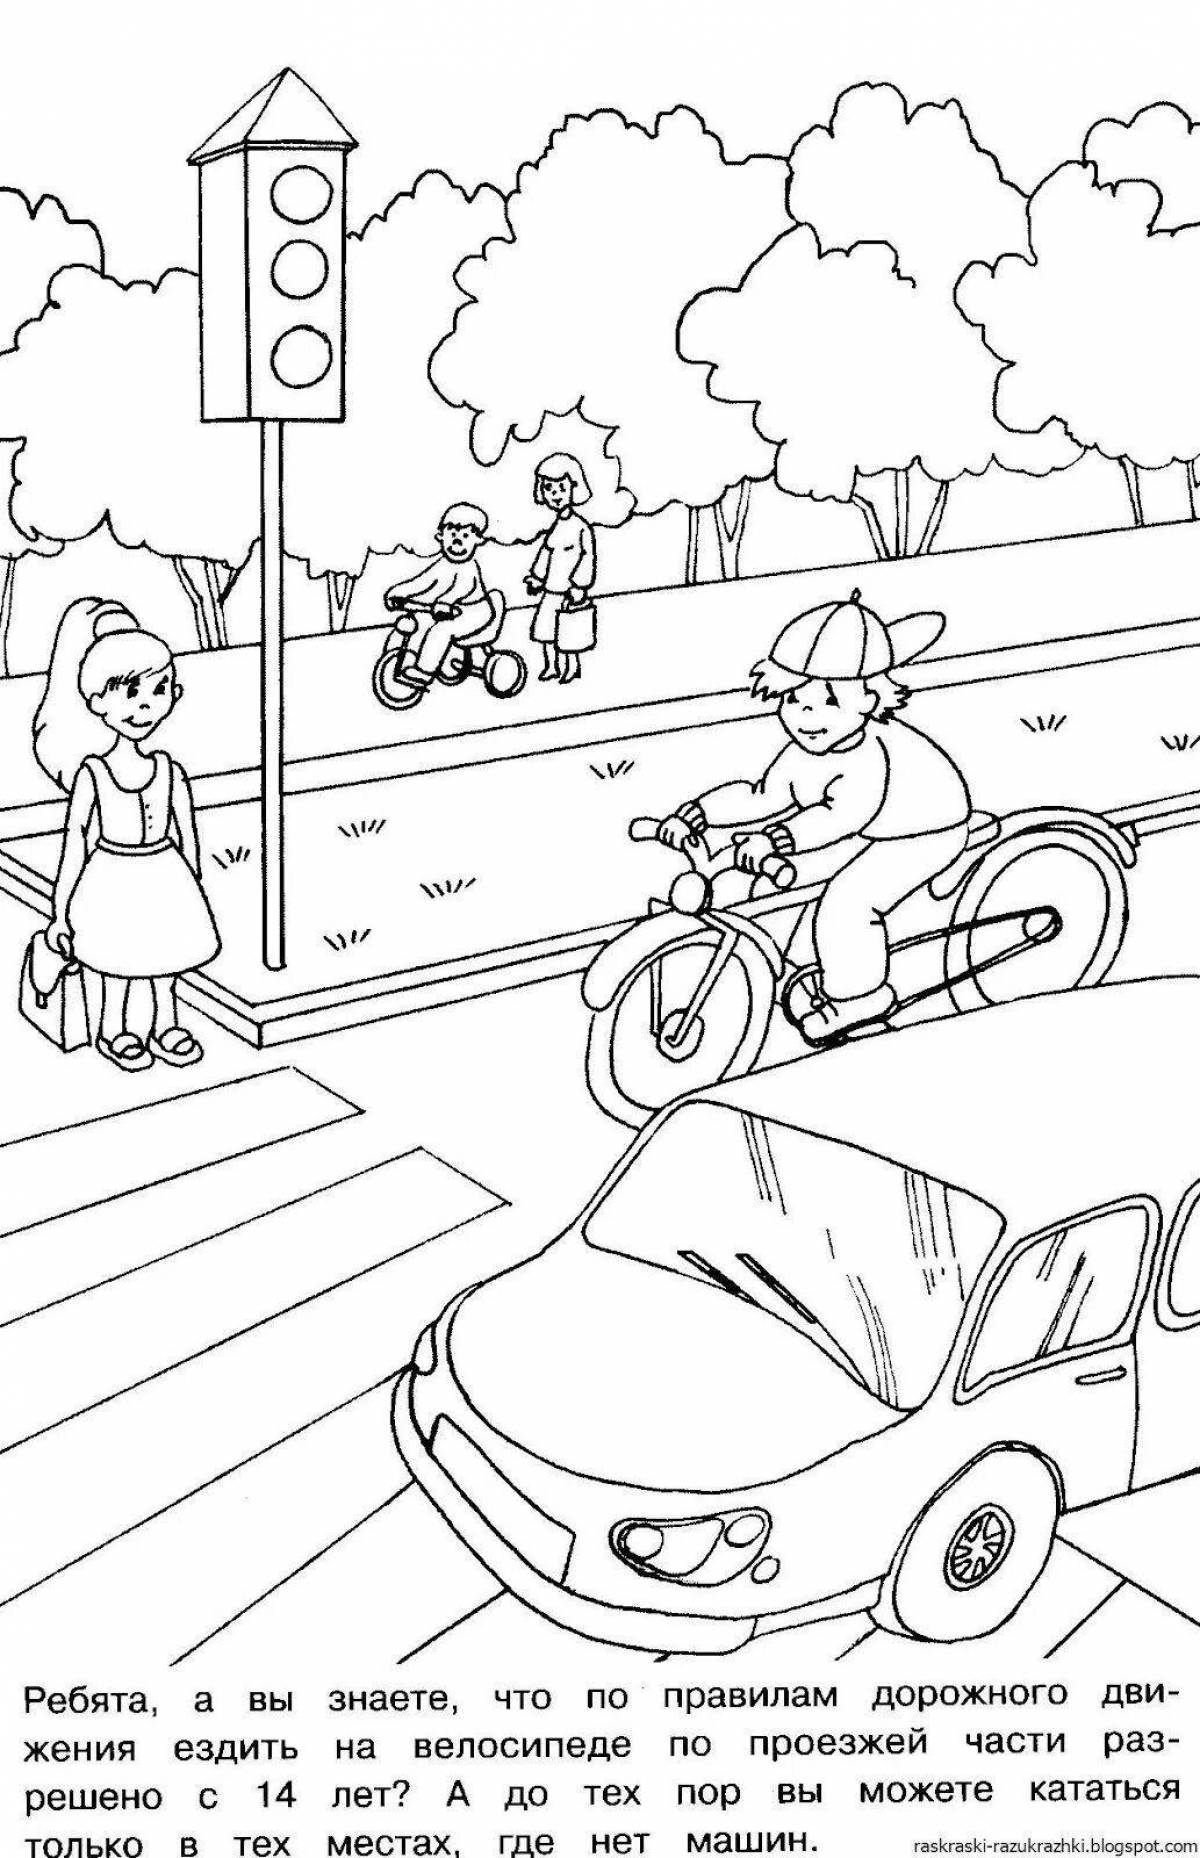 Tempting safety rules coloring book